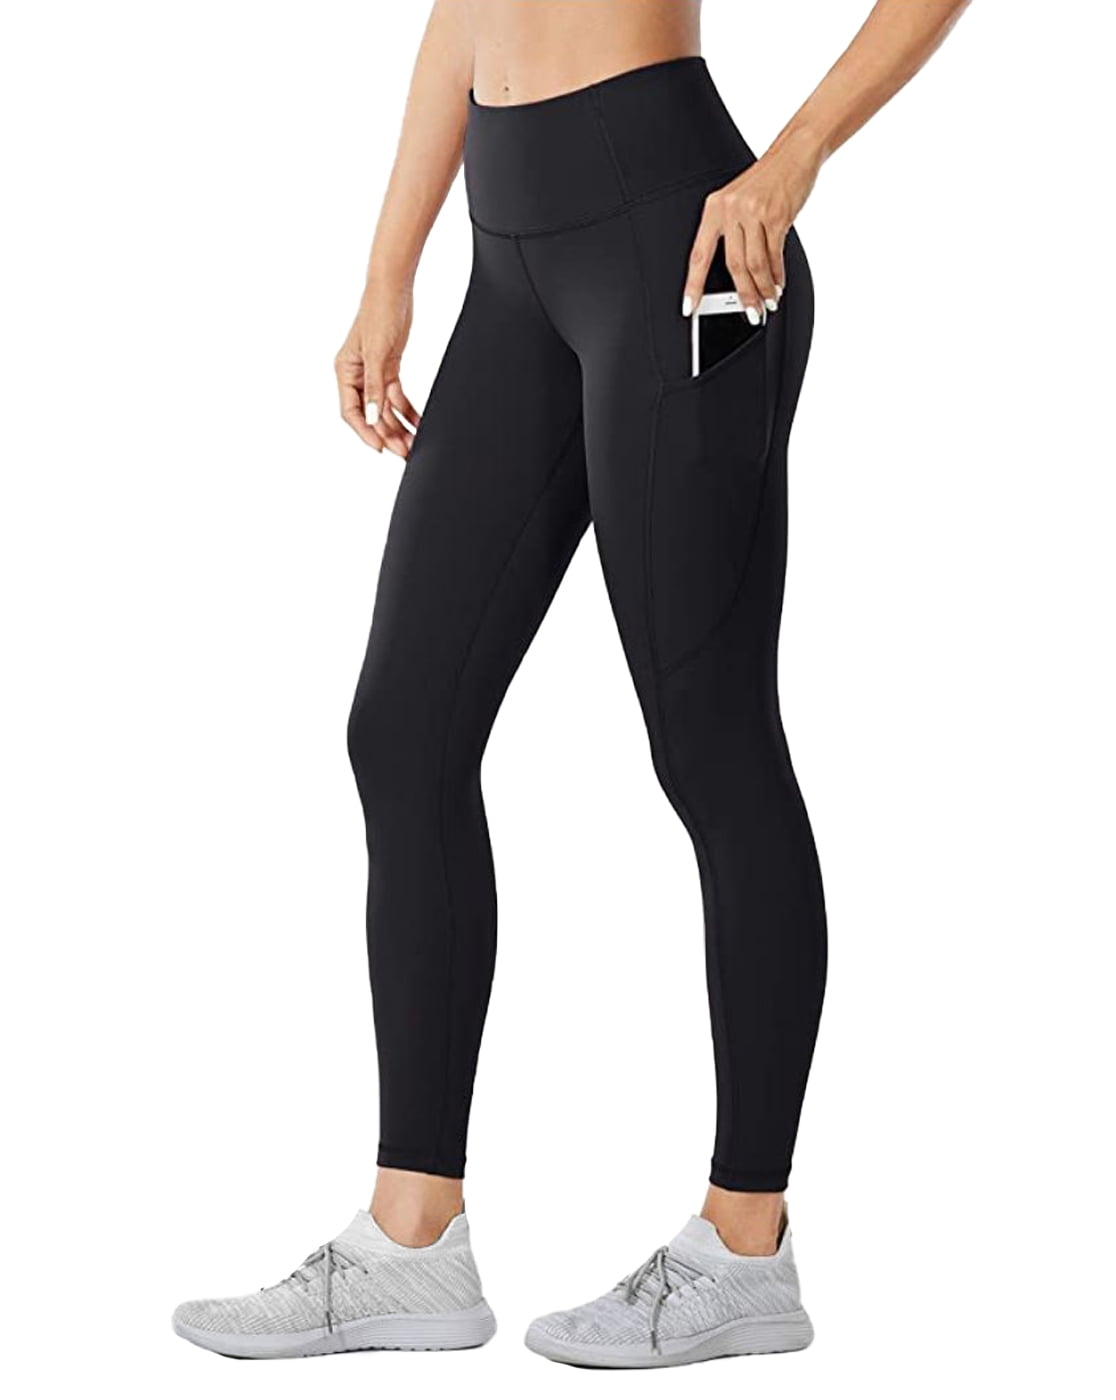 Women's Sportswear Microfiber Leggings in Black with High-Waisted,  Contouring and Firming Effect - ARMONIKA - Invertika